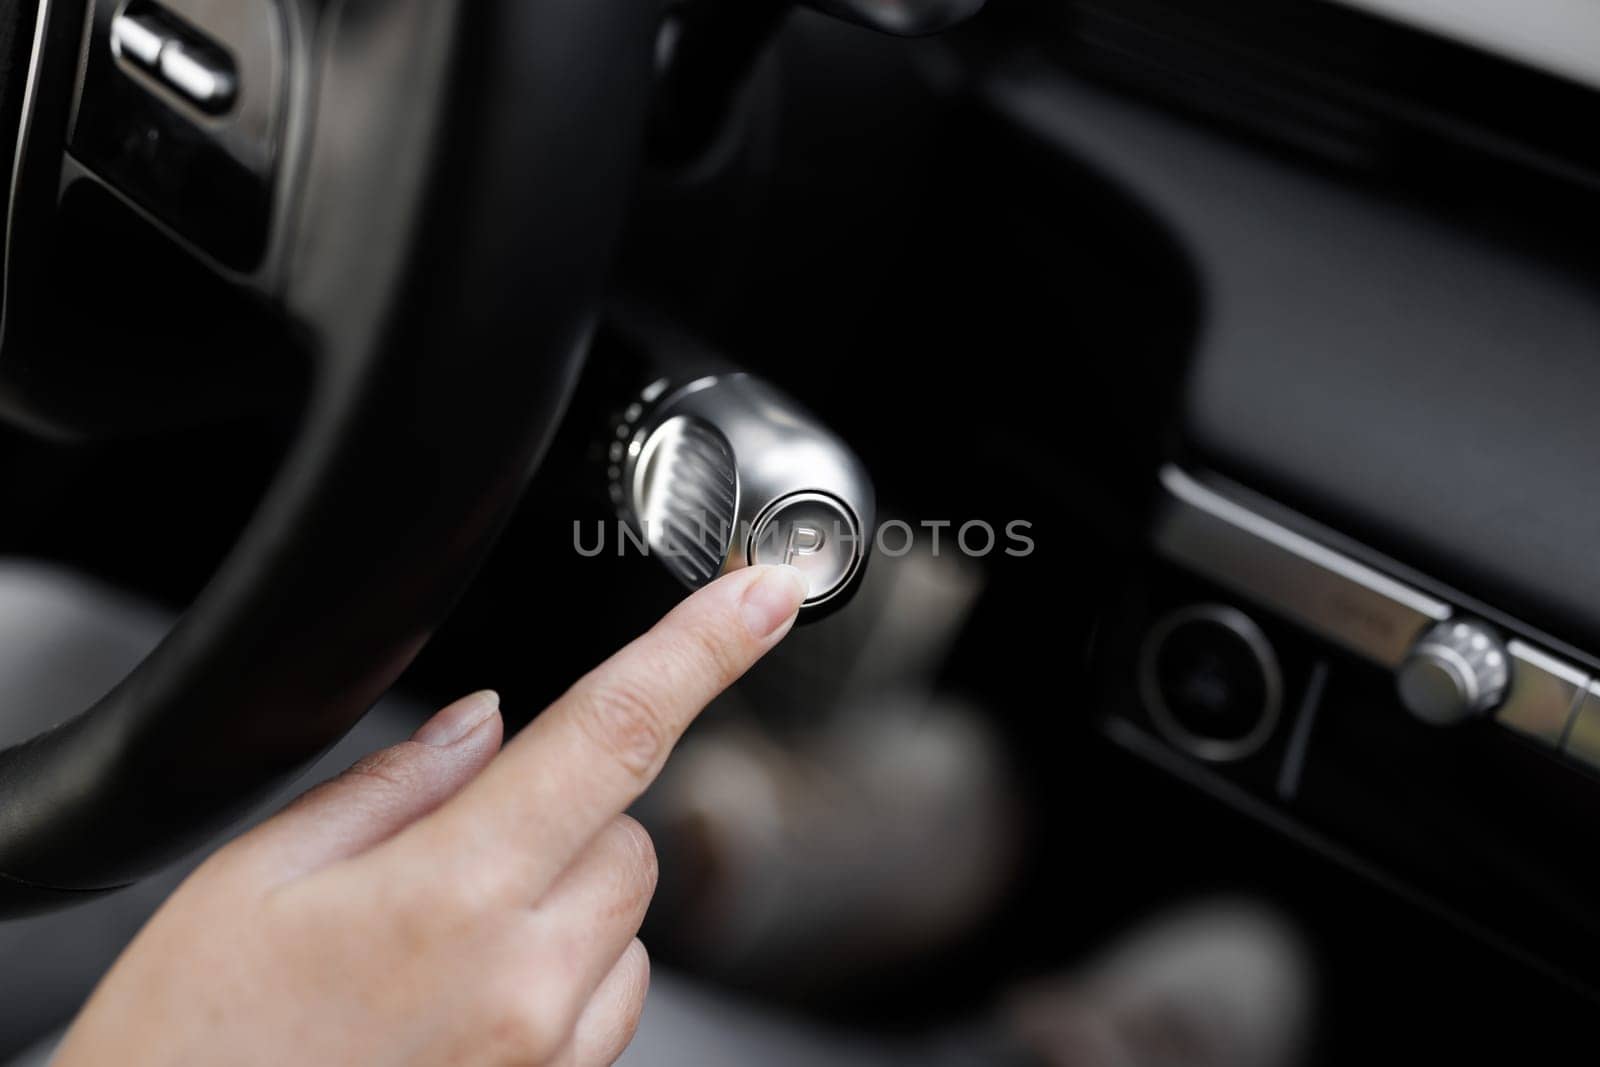 Shifting automatic transmission from P parking mode. Driver In Auto Gear Lever P Mode. The driver's hand moved the gear selector to the Parking mode in the electric car.